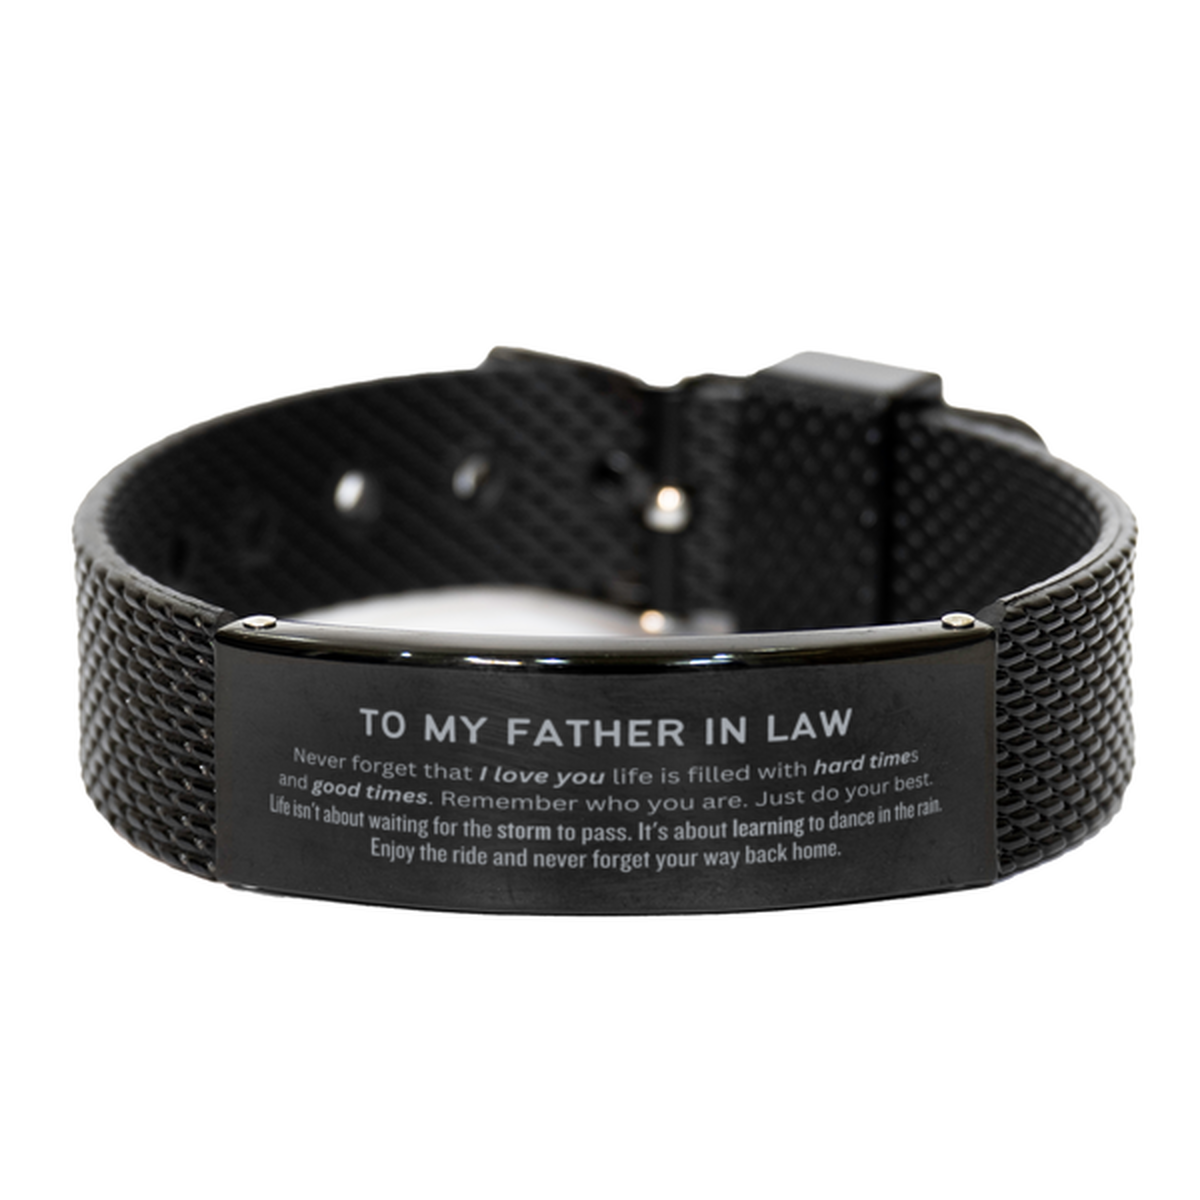 Christmas Father In Law Black Shark Mesh Bracelet Gifts, To My Father In Law Birthday Thank You Gifts For Father In Law, Graduation Unique Gifts For Father In Law To My Father In Law Never forget that I love you life is filled with hard times and good tim